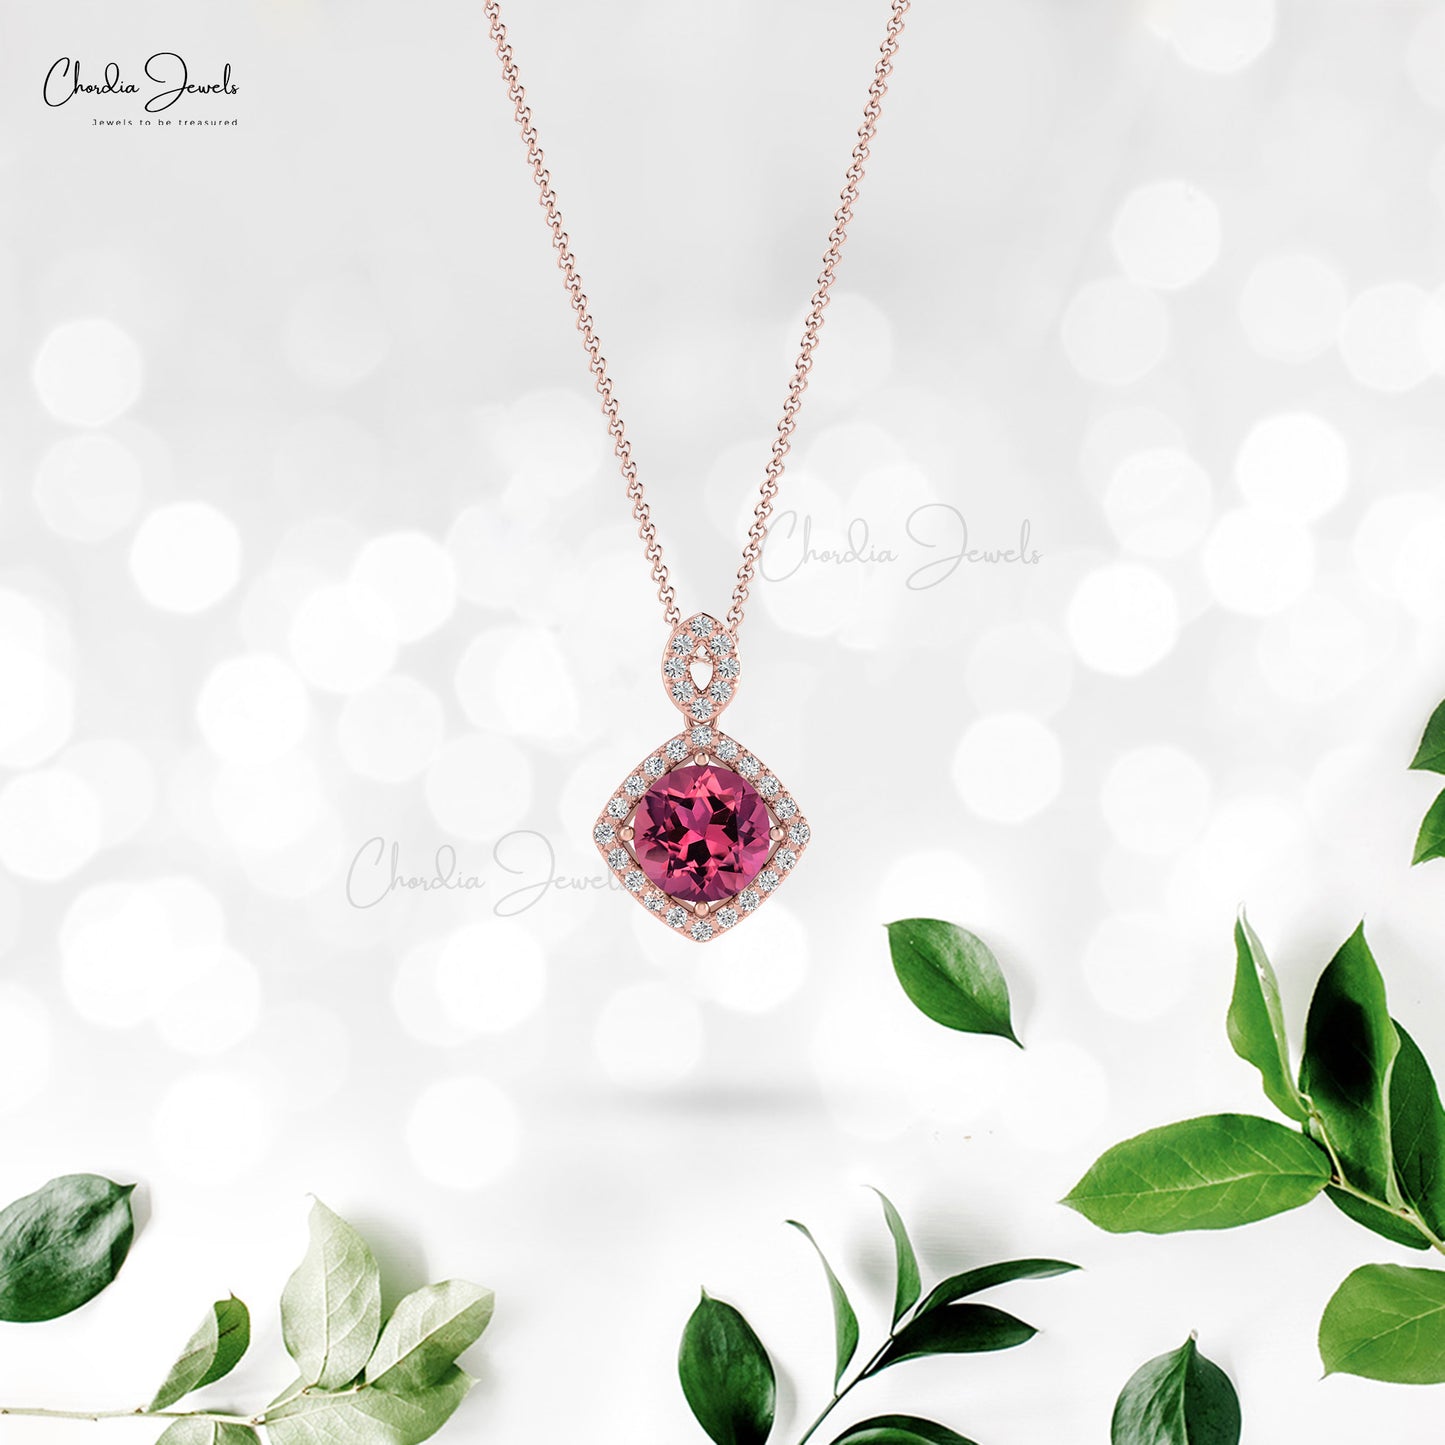 Brilliant Round Cut 7mm Natural Pink Tourmaline Pendant 14k Solid Gold Diamond Halo Pendant For October Birthstone